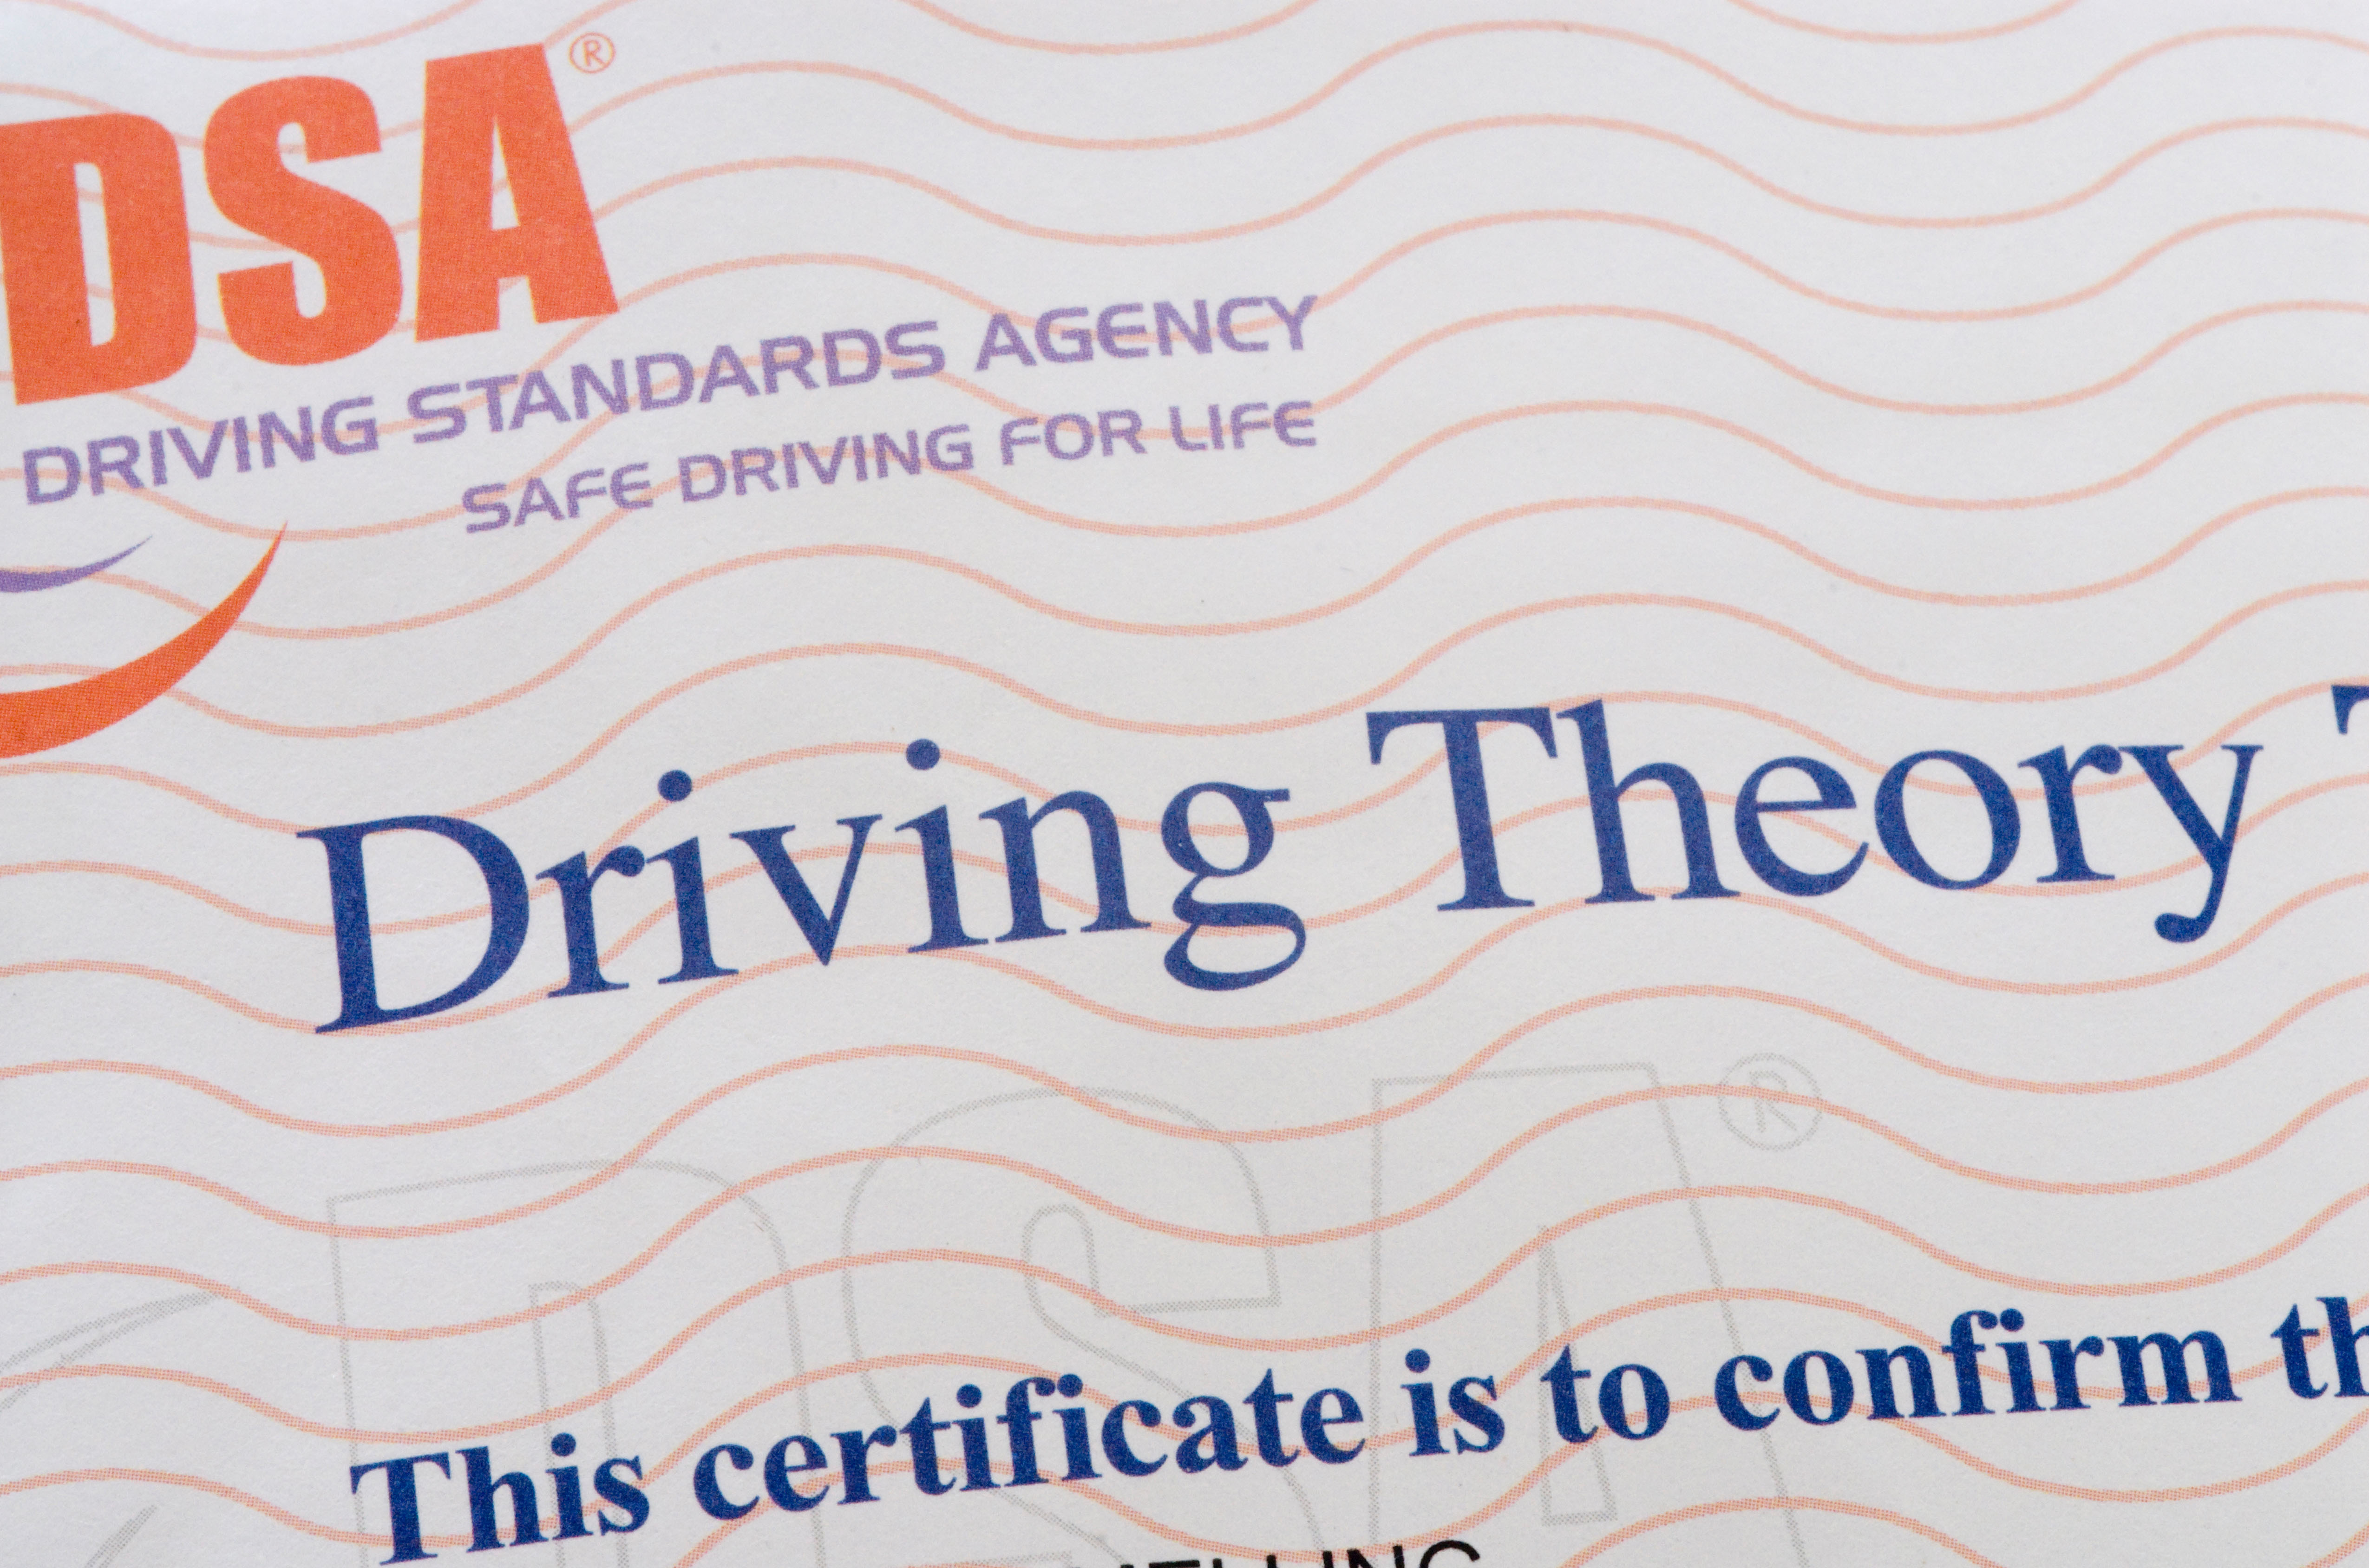 Driving theory test certificate